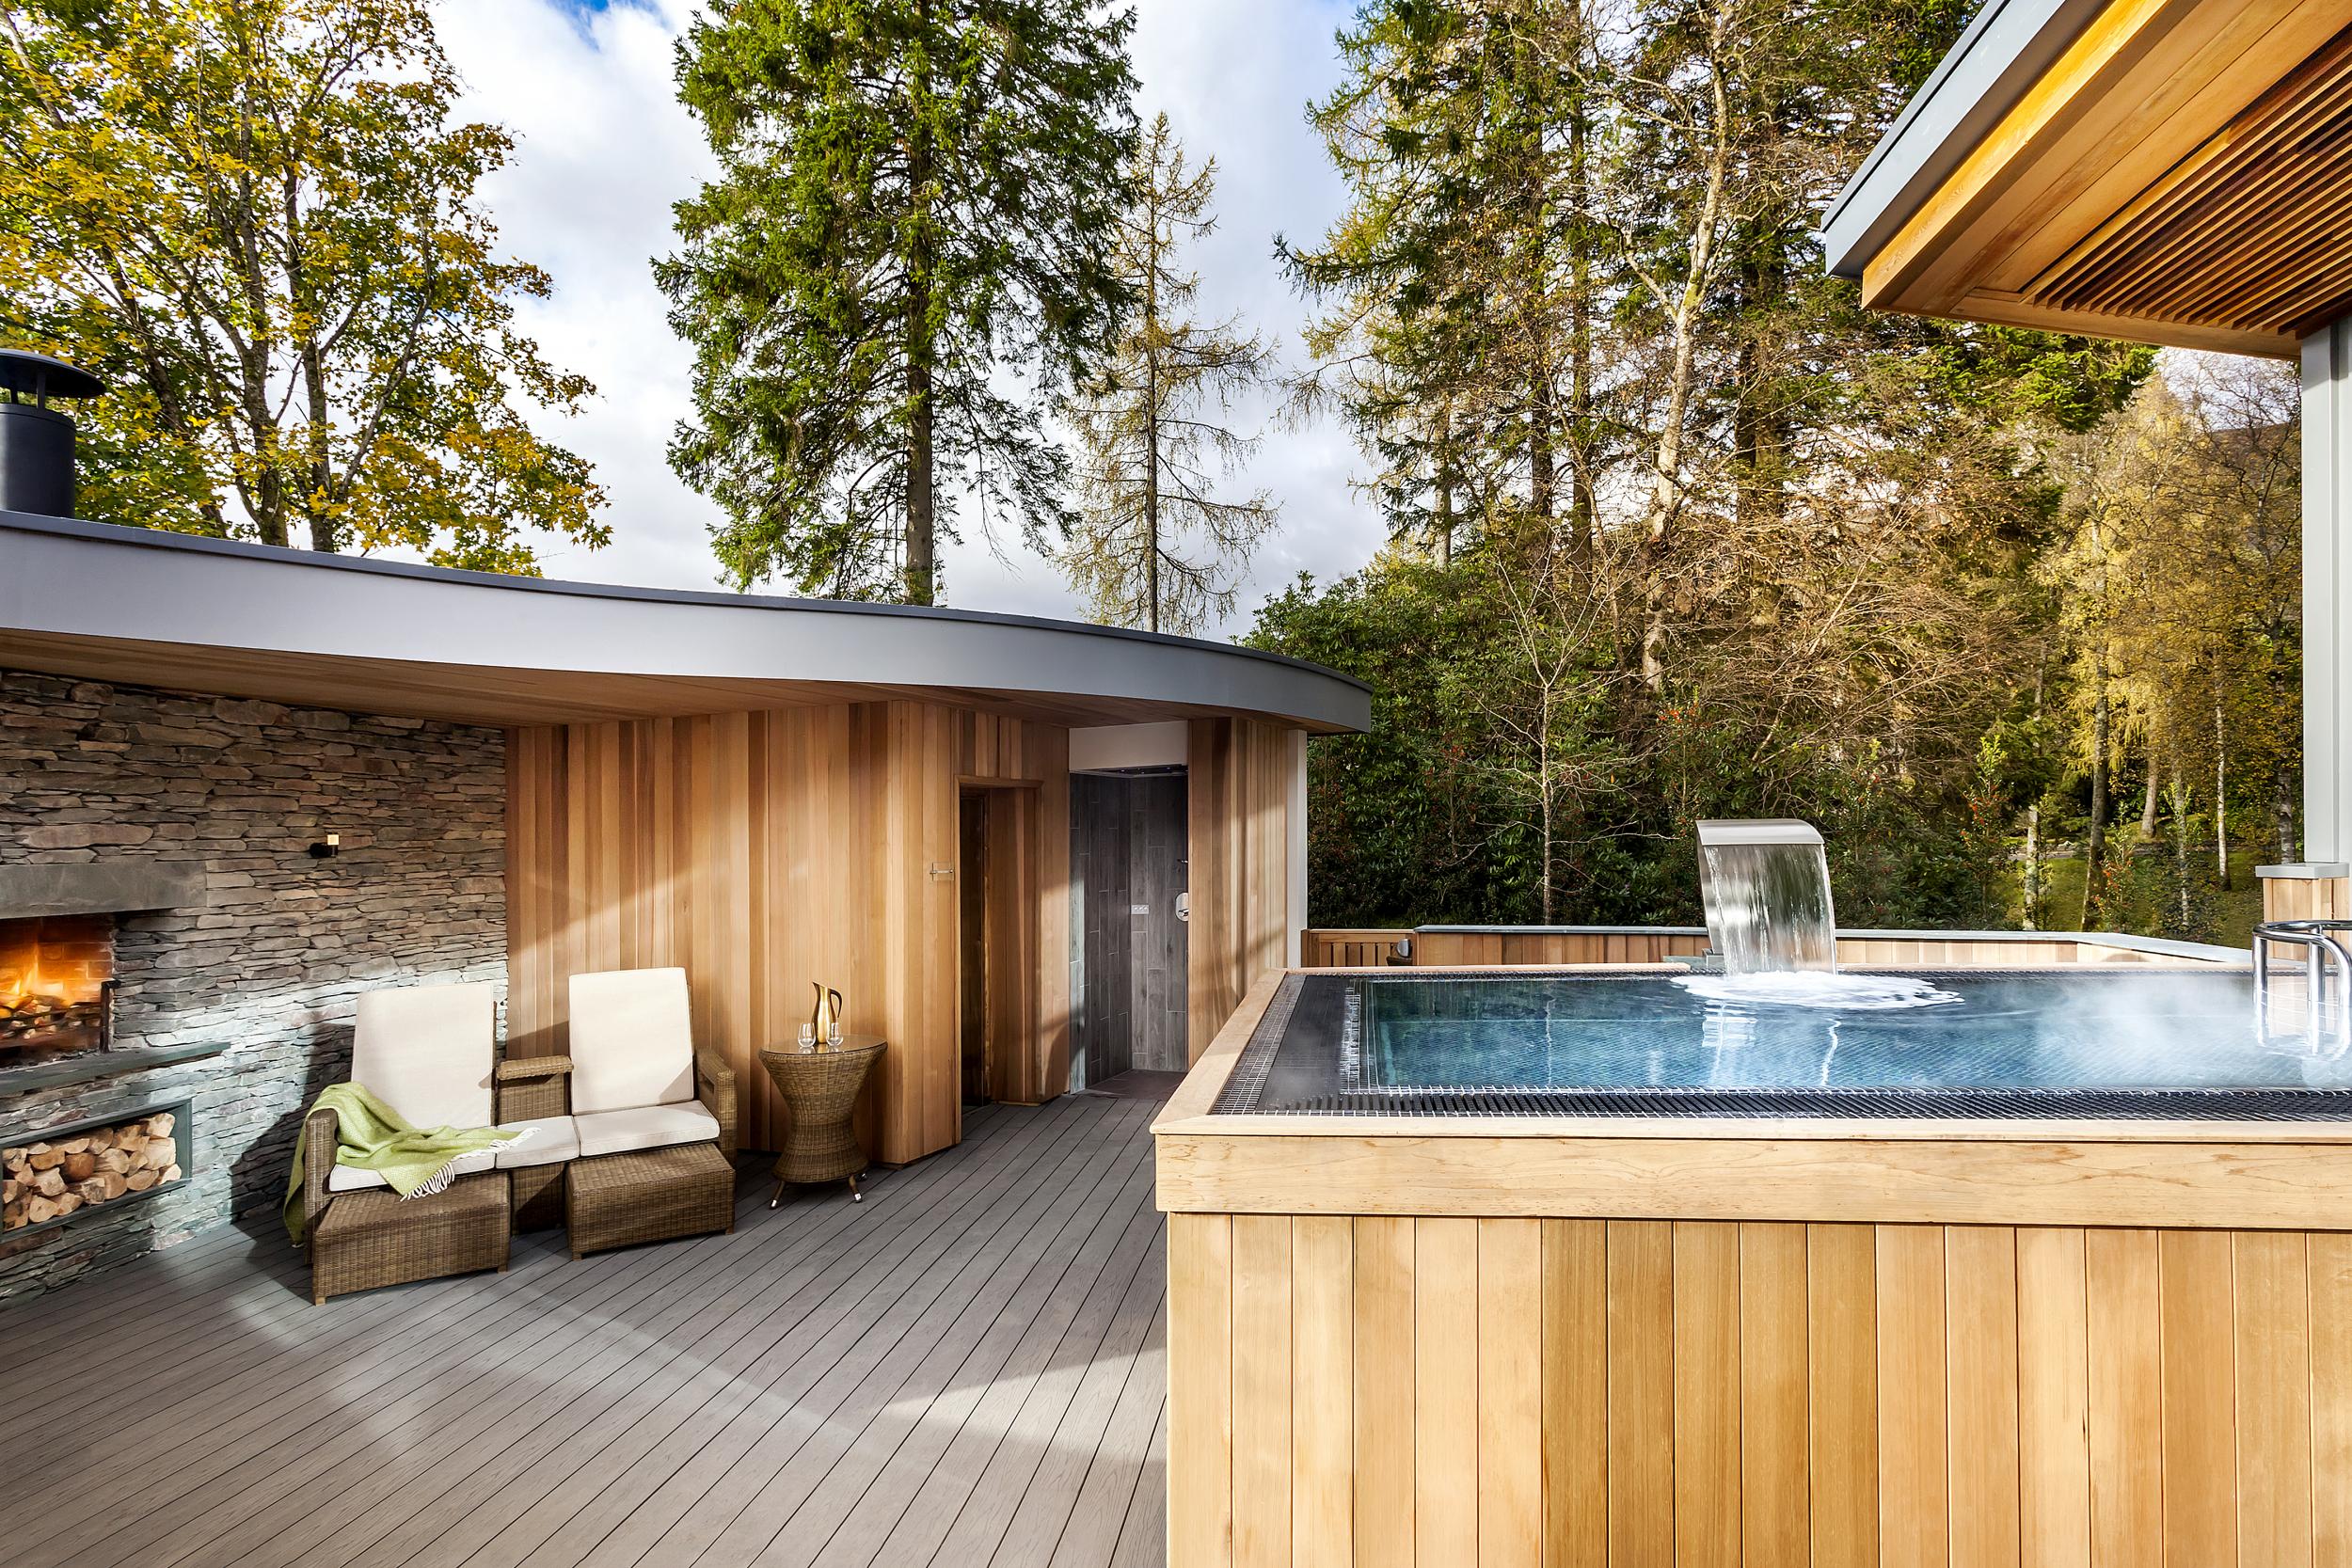 The sauna and outdoor plunge pool at Brimstone